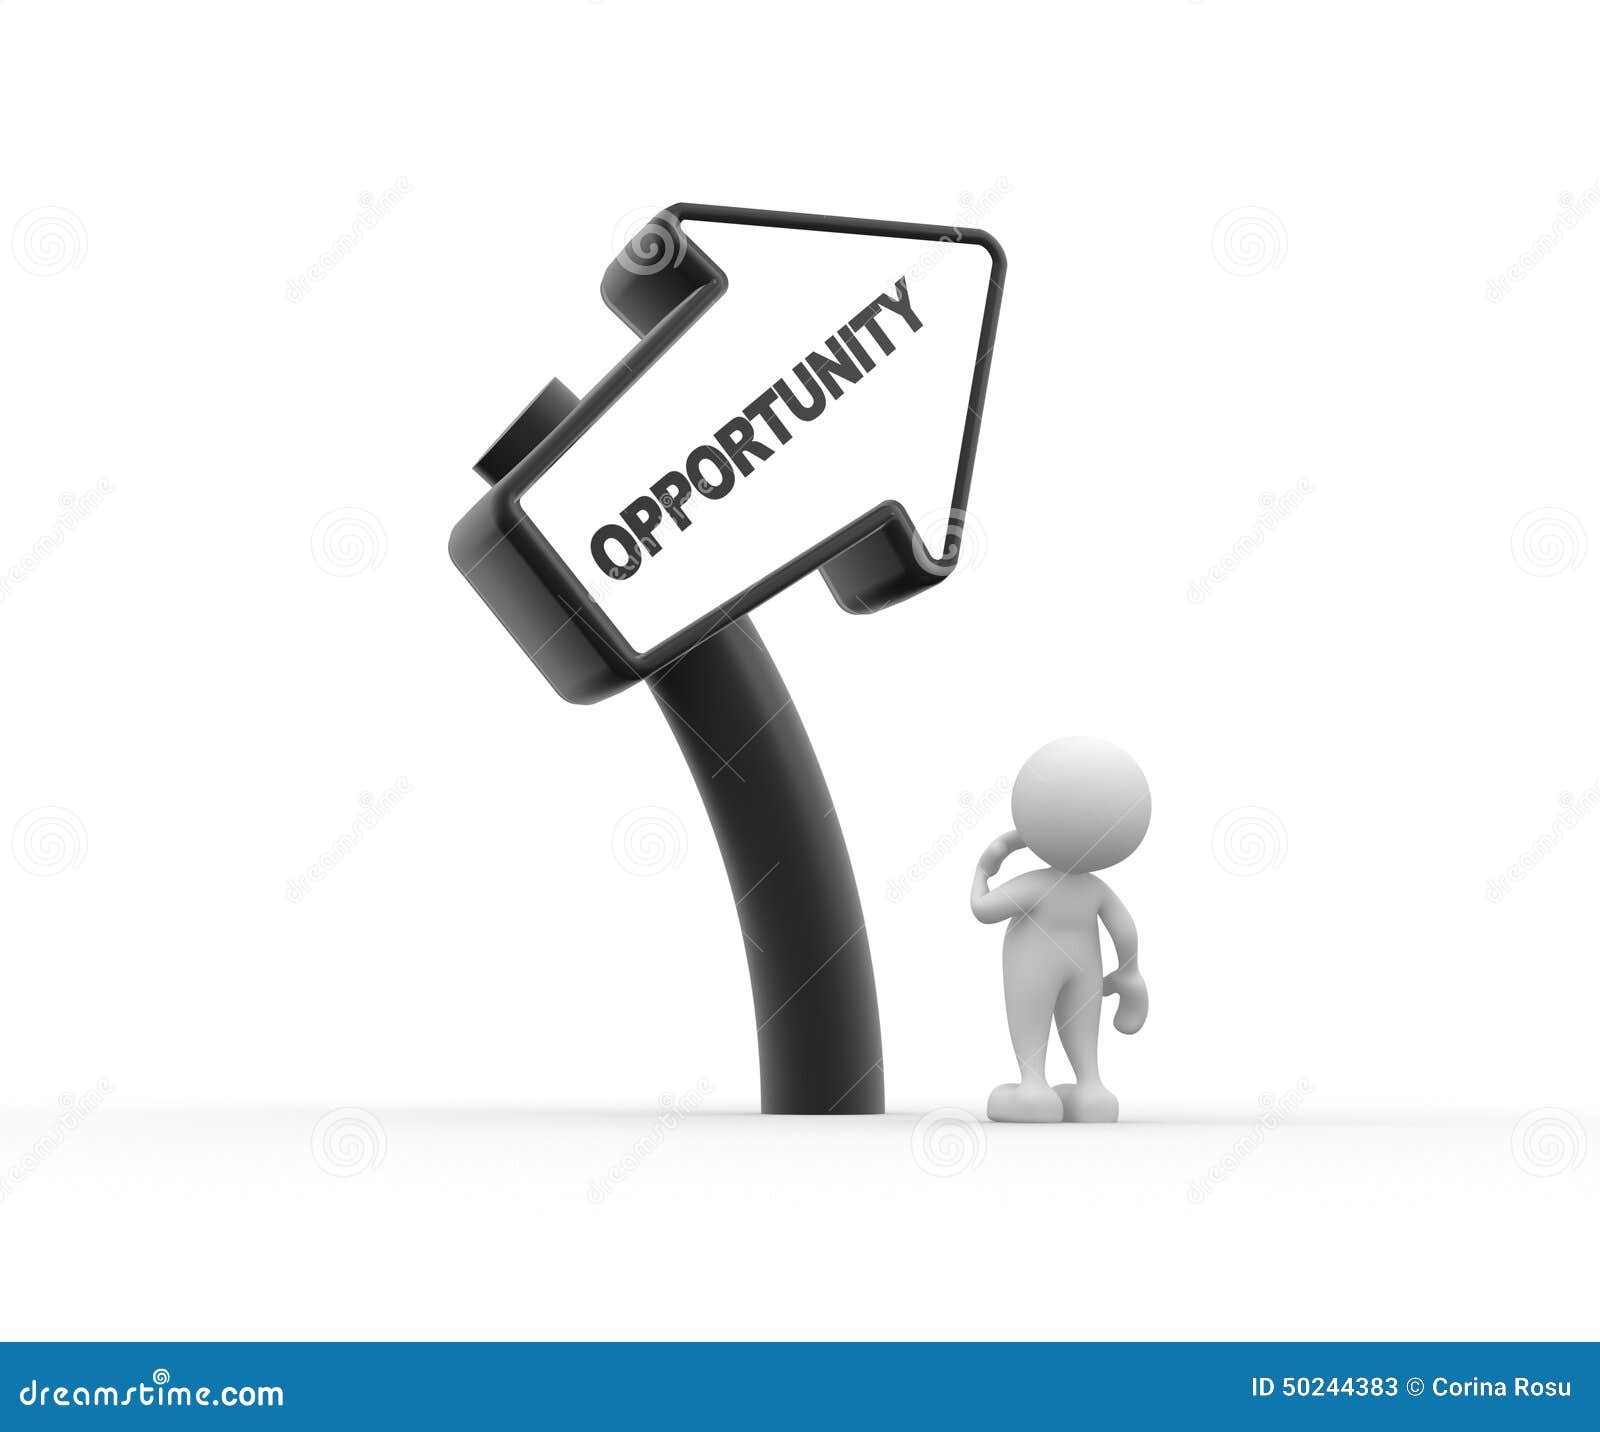 business opportunity clipart - photo #15